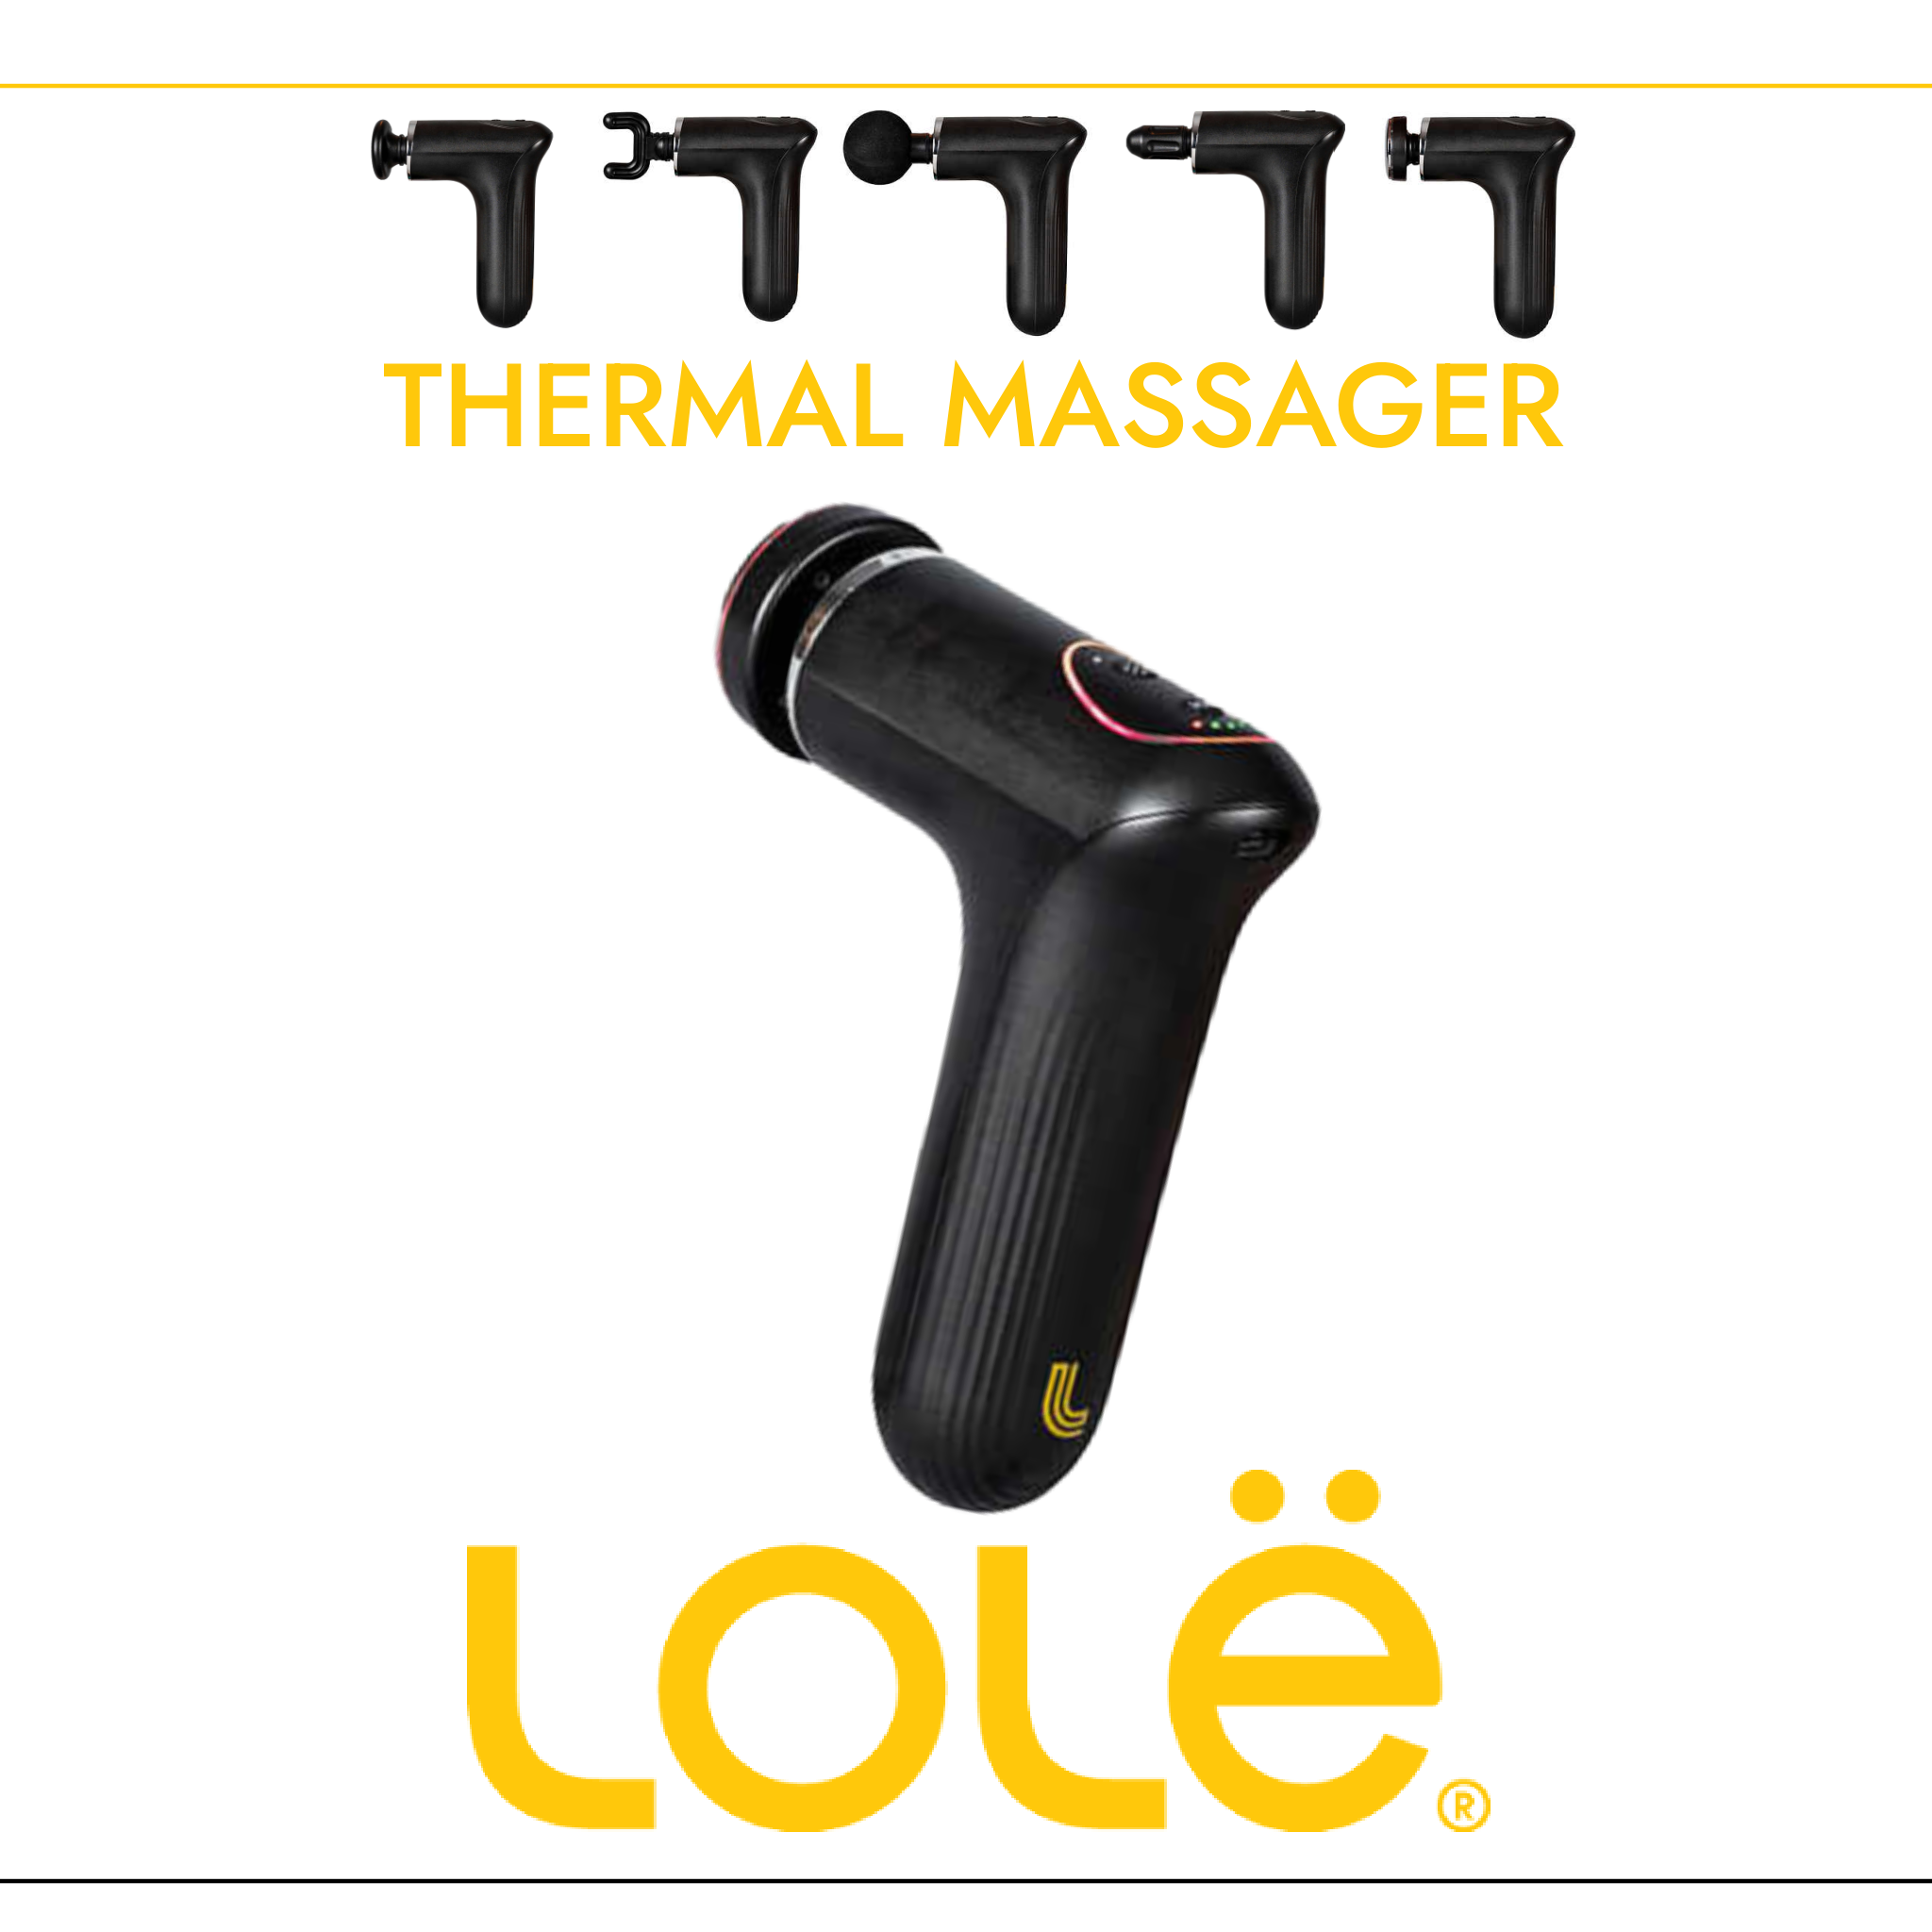 Lole Thermal Massager